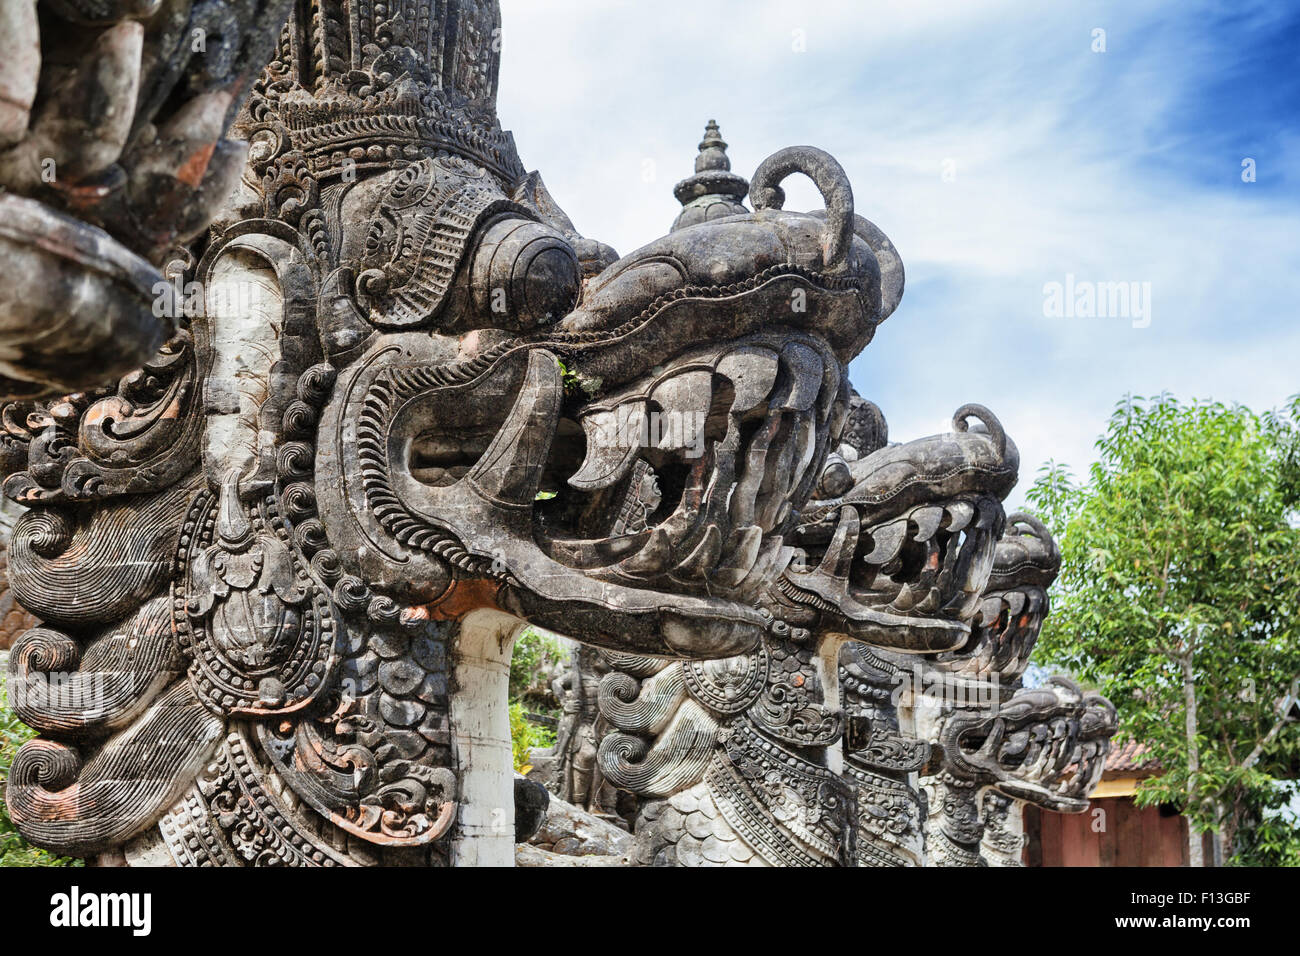 Traditional indonesian art and symbol of balinese hindu religion - faces of mythological dragons in front of Lempuyang temple. Stock Photo